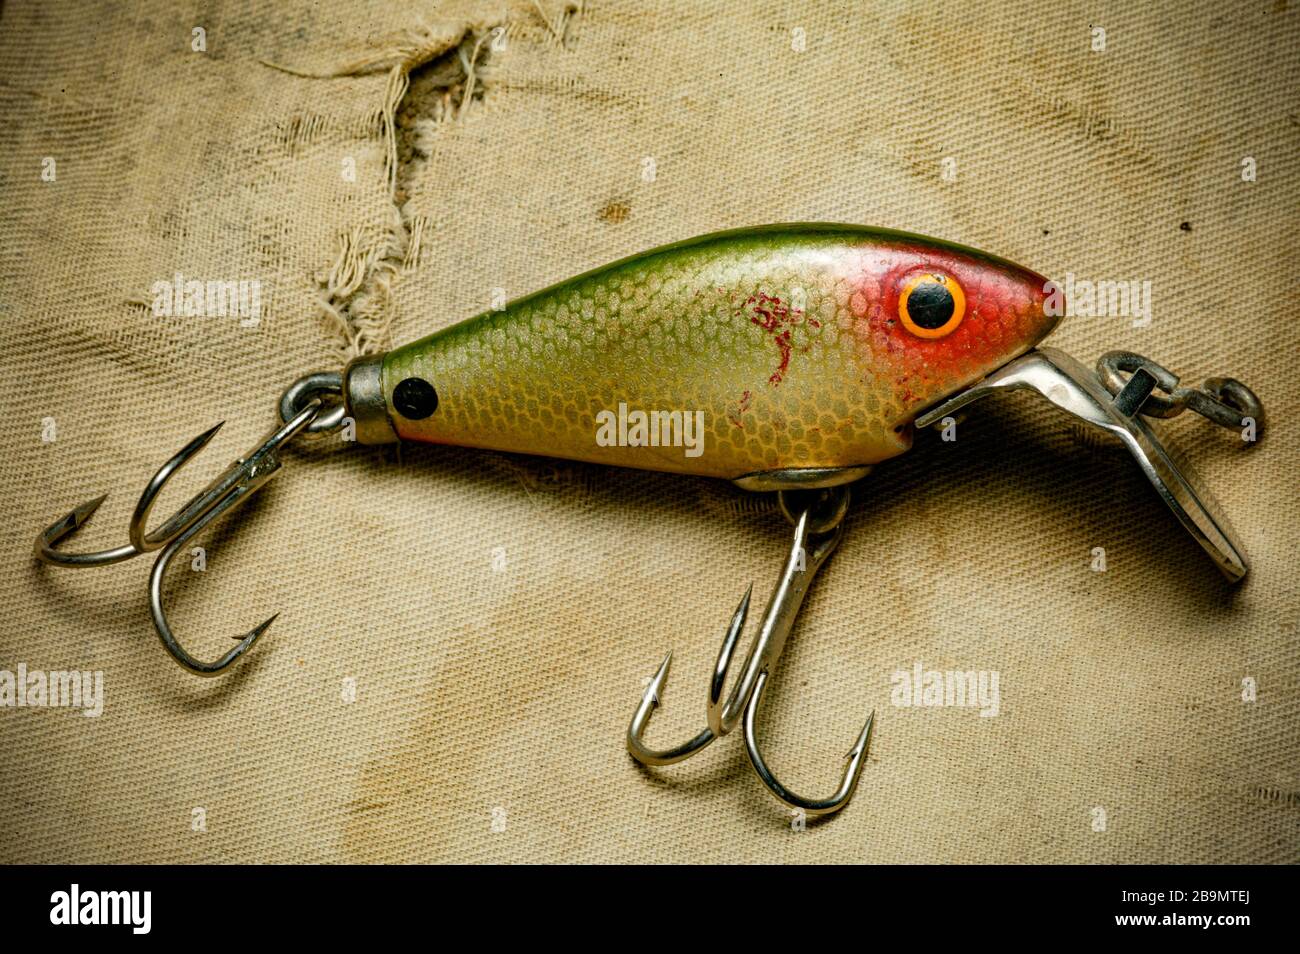 https://c8.alamy.com/comp/2B9MTEJ/an-example-of-a-vintage-fishing-lure-equipped-with-treble-hooks-possibly-made-by-woods-mfg-displayed-on-an-old-fishing-bag-lures-such-as-these-are-2B9MTEJ.jpg